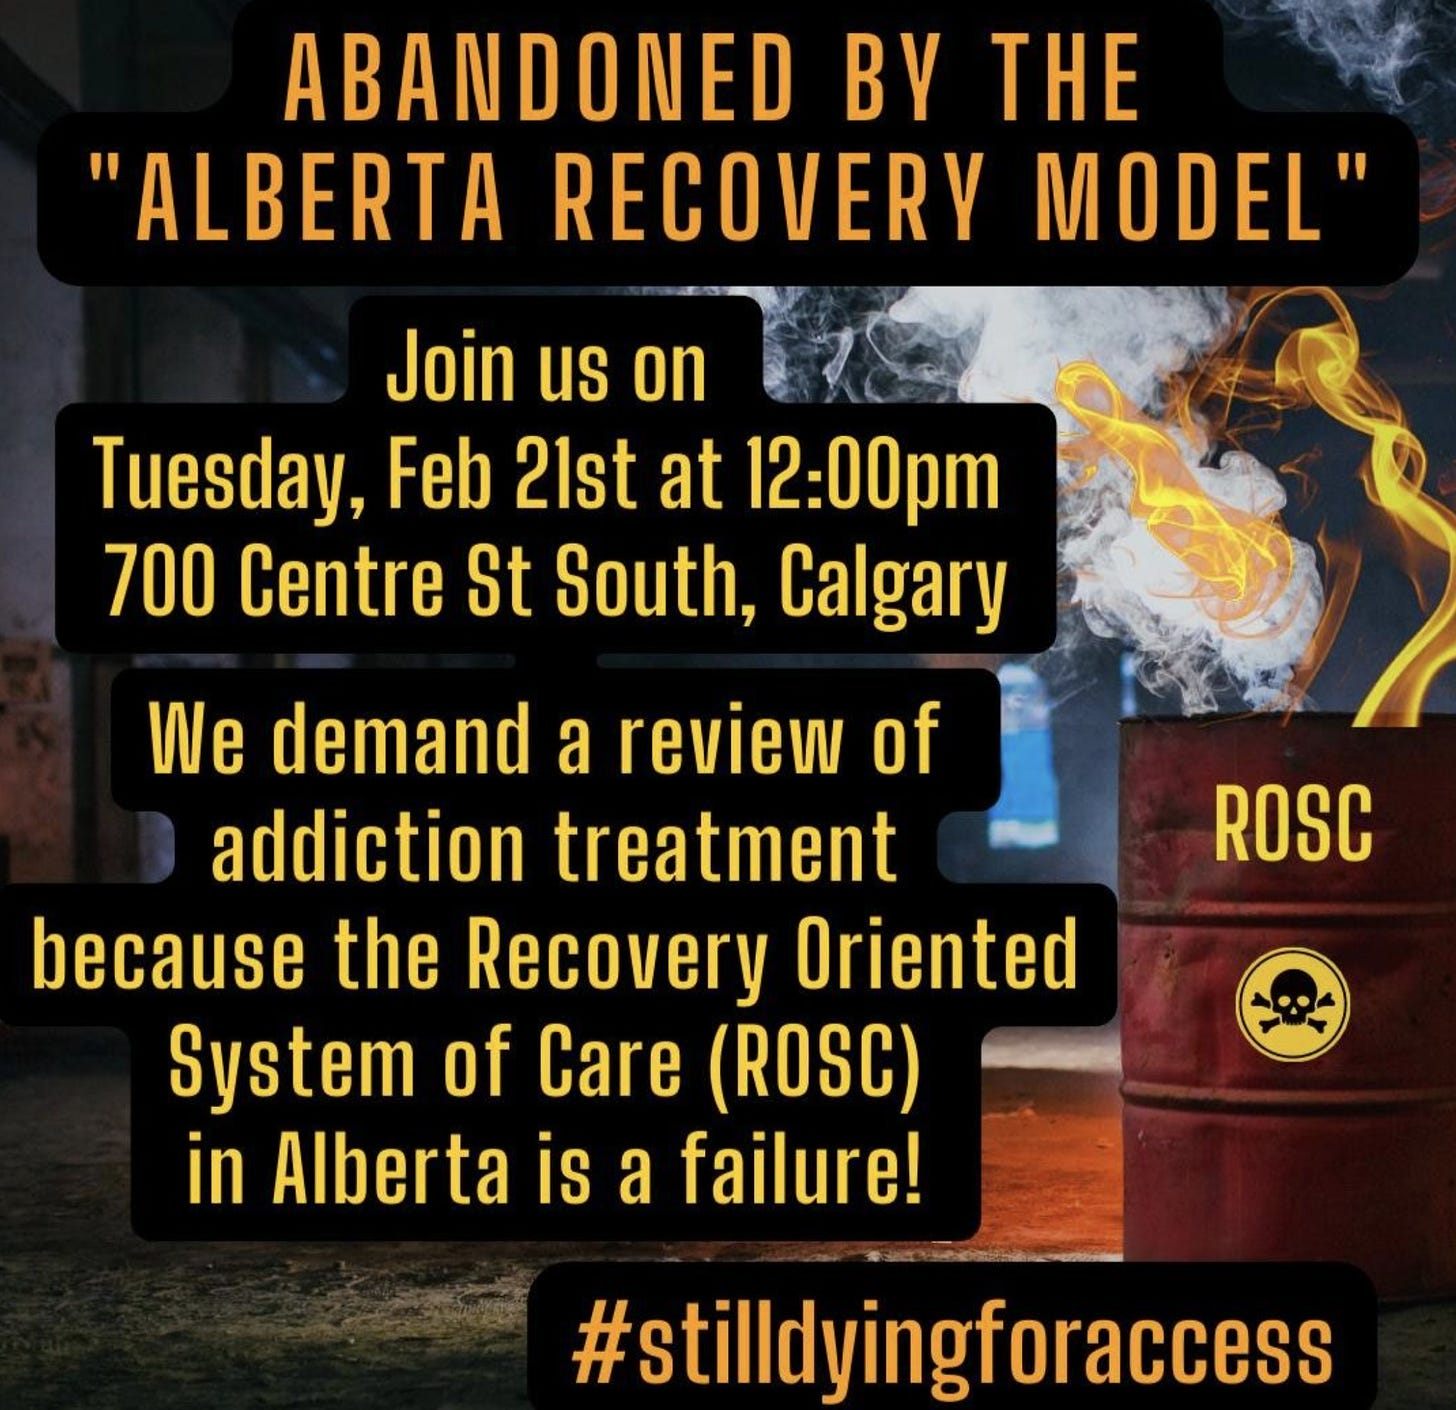 Abandoned by Alberto recovery model. Join us on Tuesday, February 21 at 12 PM. 700 Centre St. South, Calgary. We demand a review of addiction treatment because the recovery oriented system of care in Alberta is a failure! #StillDyingForAccess. Image: a flaming trashcan with ROSC printed on it with a skull and crossbones underneath.